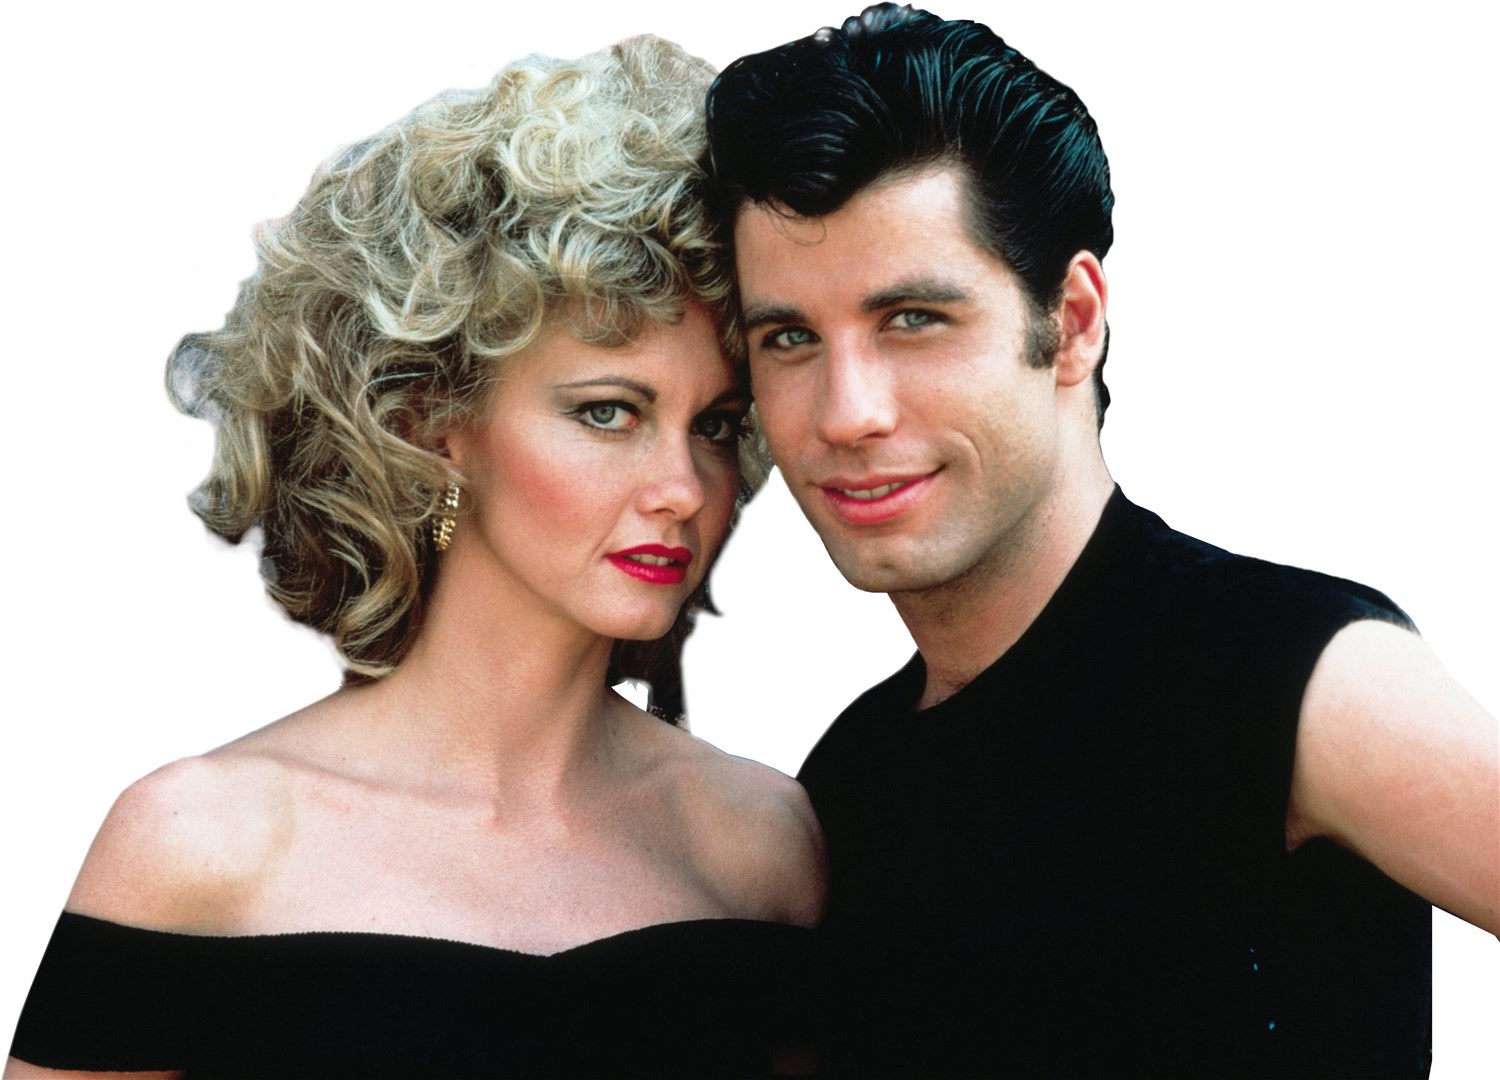 The Grease screening is already sold out.